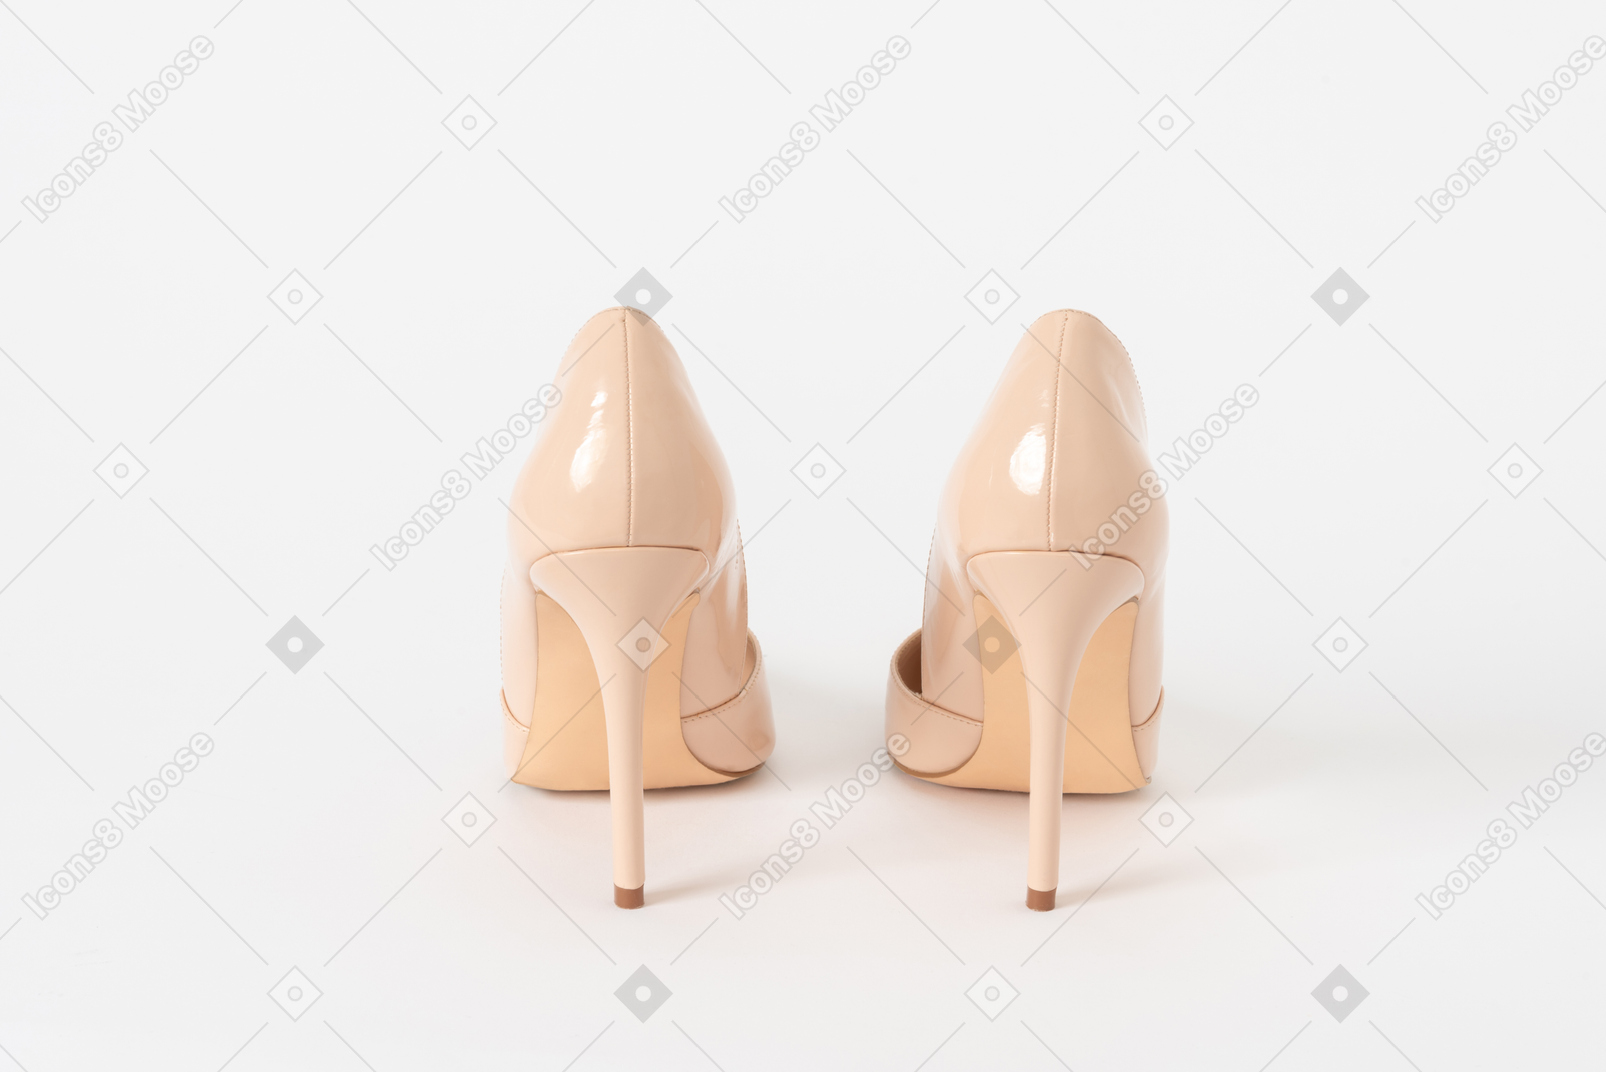 A back shot of a pair of beige lacquered stiletto shoes